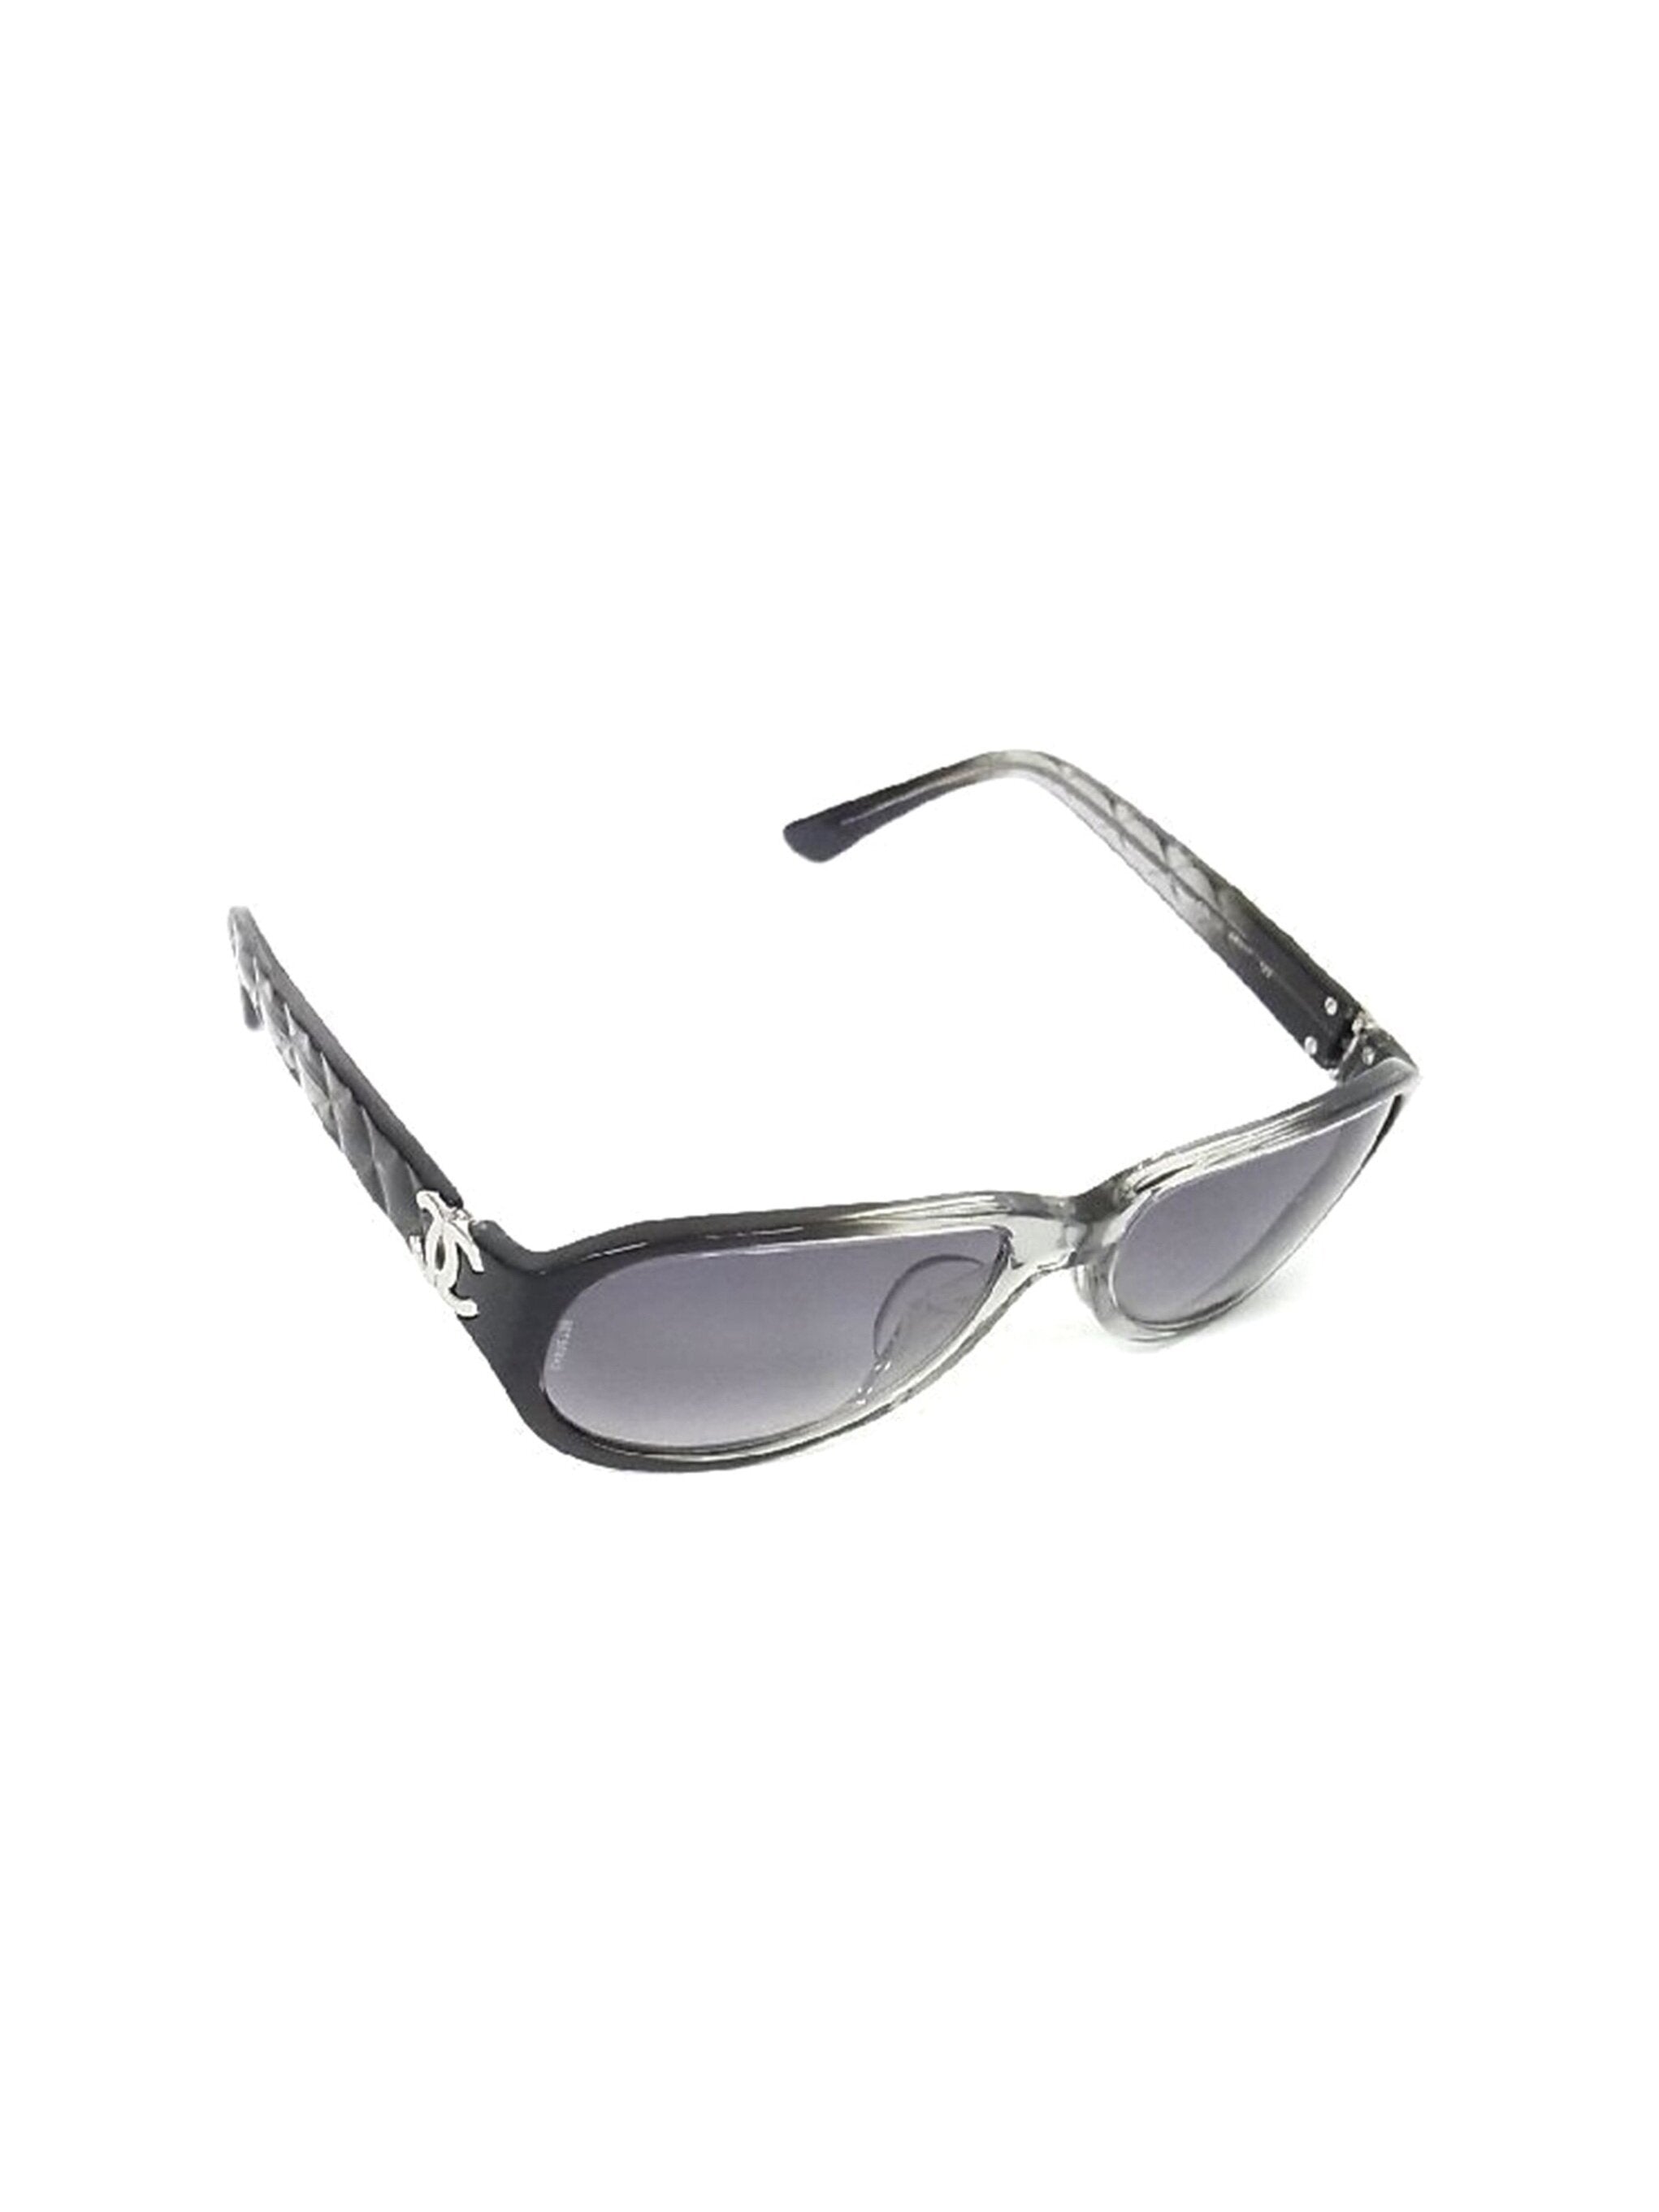 Chanel 2000s Black and White Quilted Sunglasses